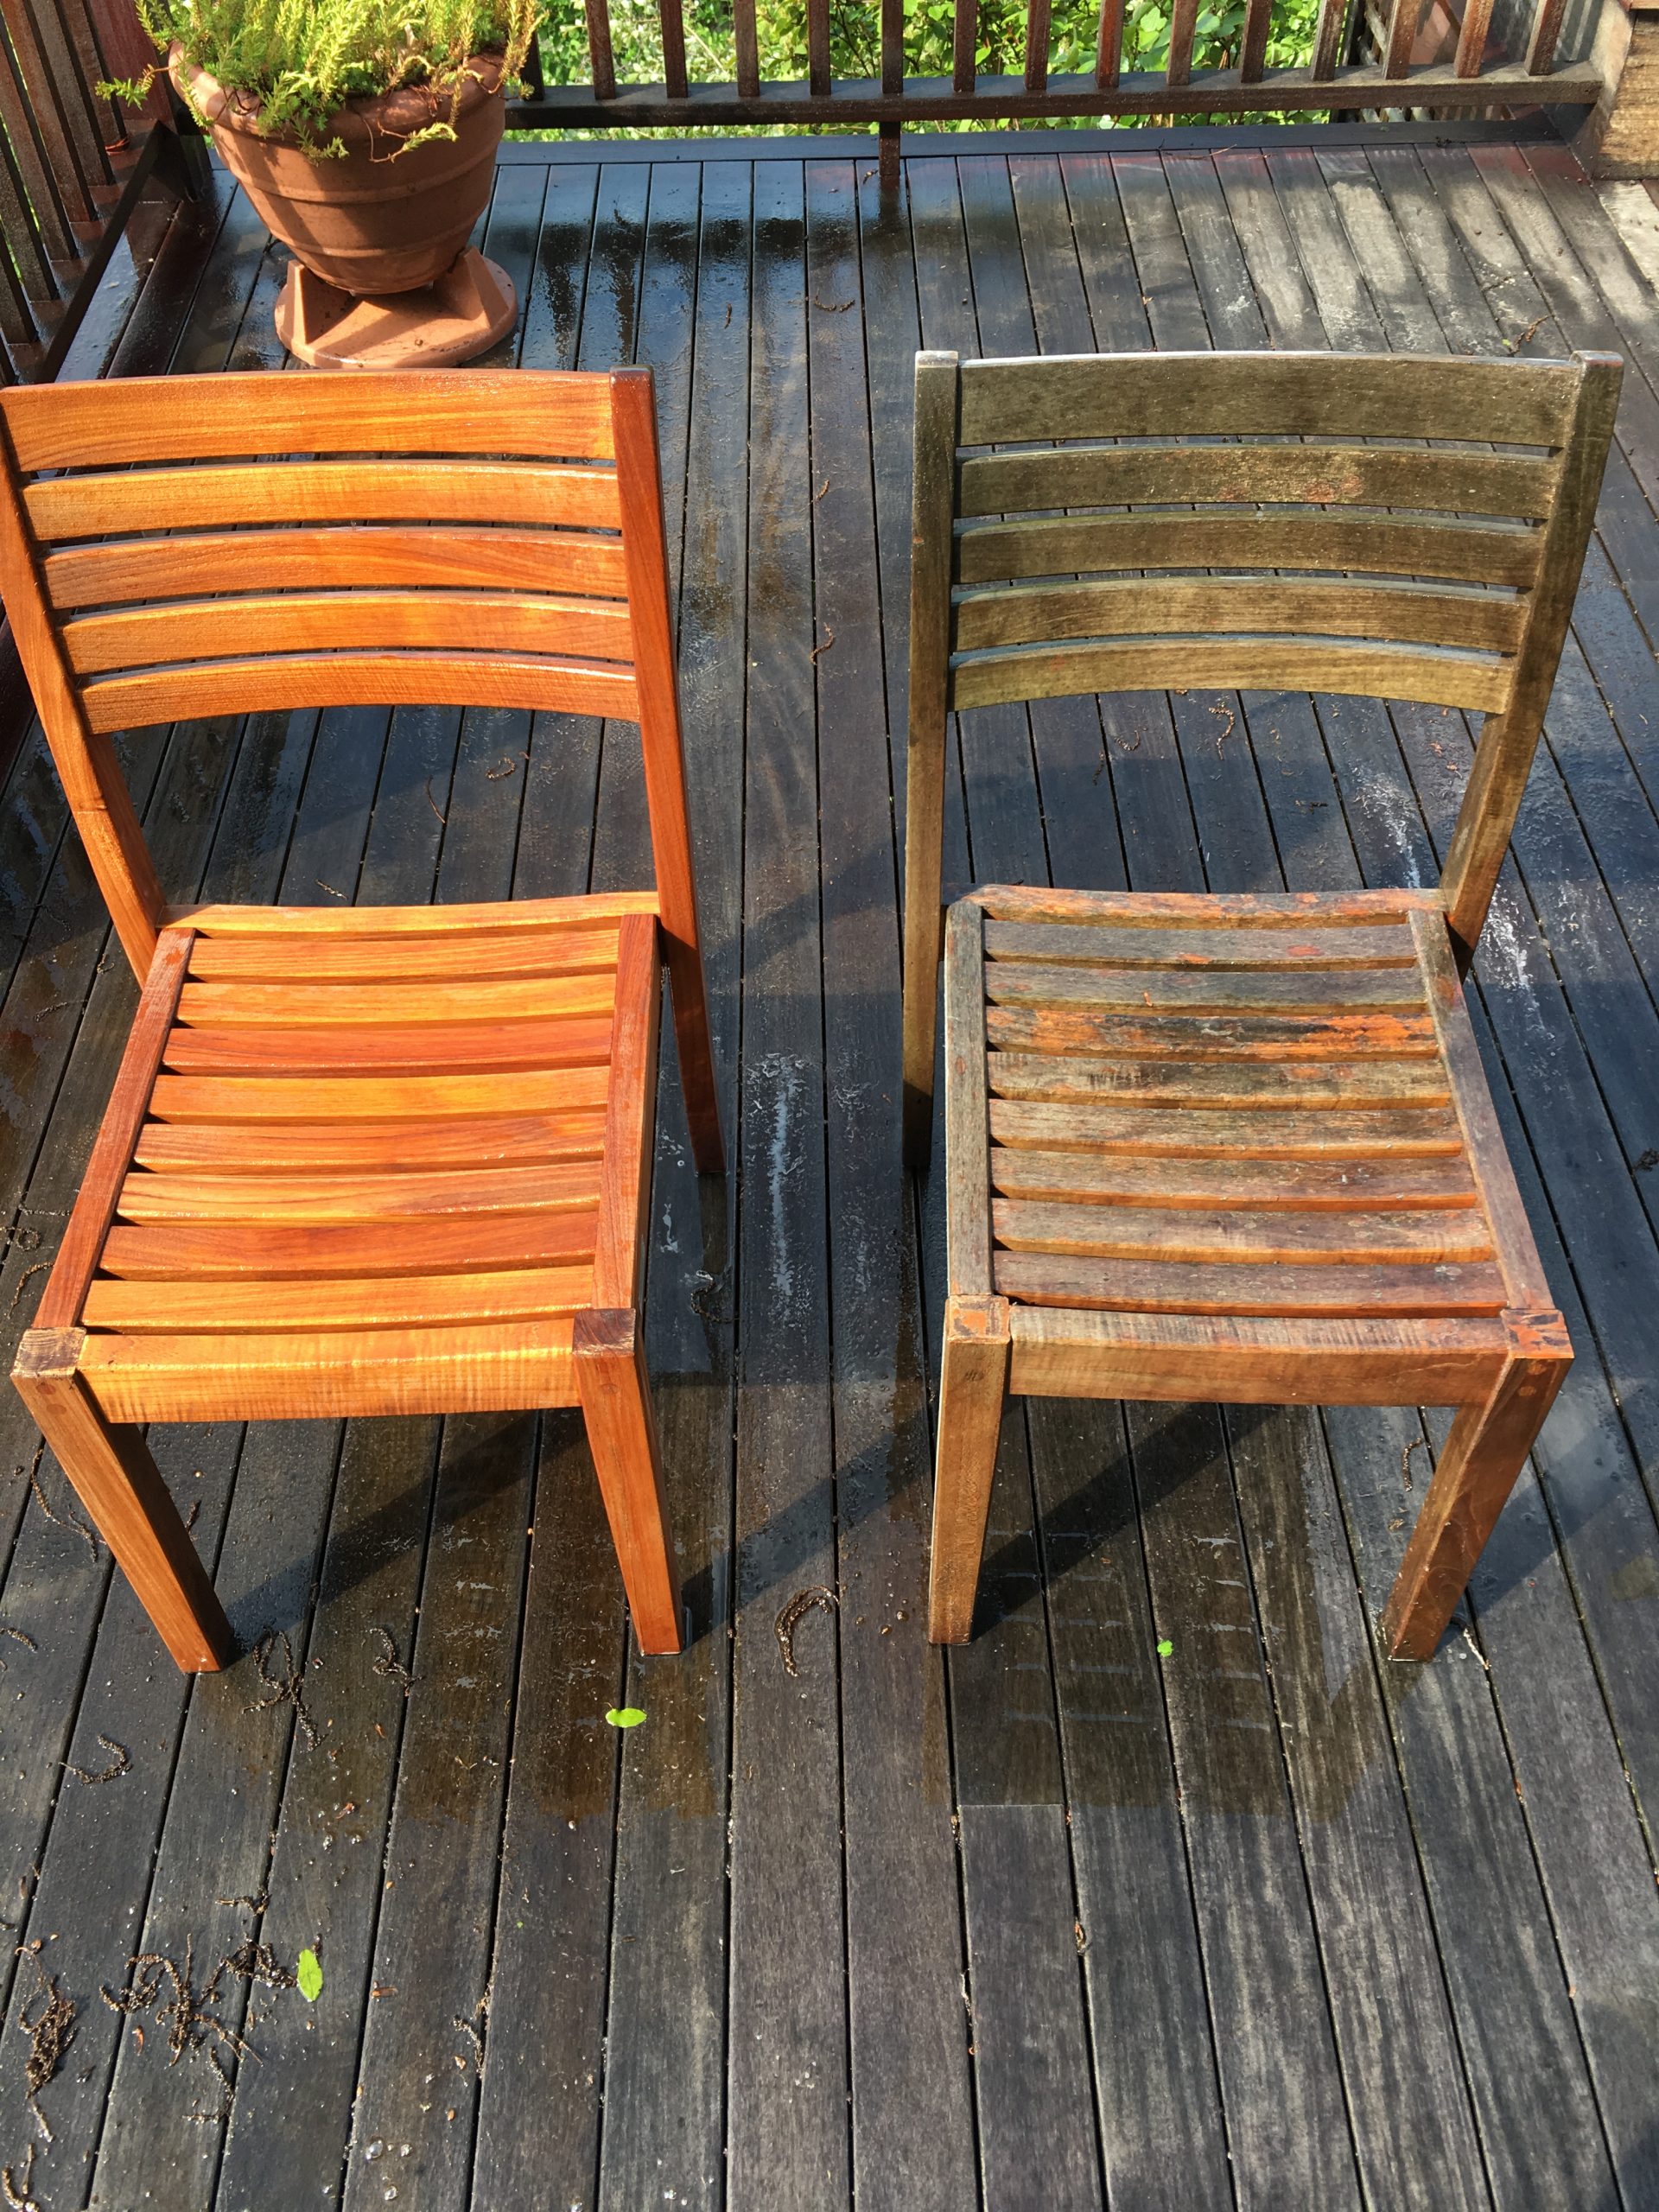 Clean wood chair and dirty wood chair